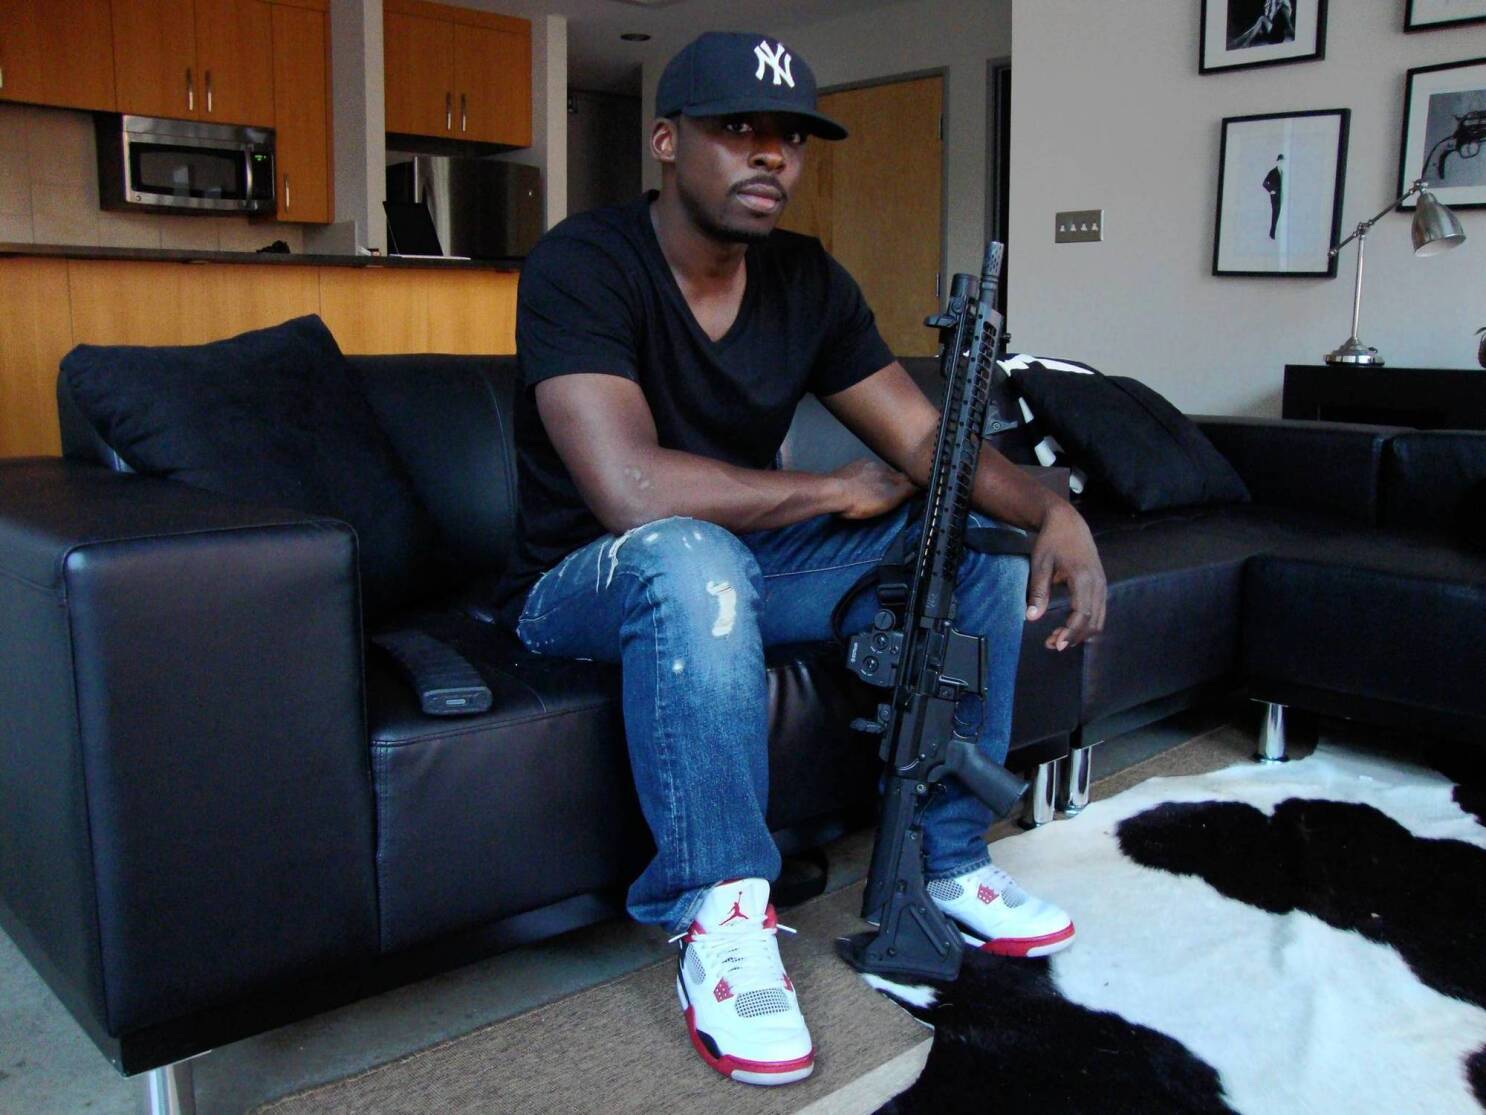 Colion Noir: I'm One of the Few Black People Willing to Admit